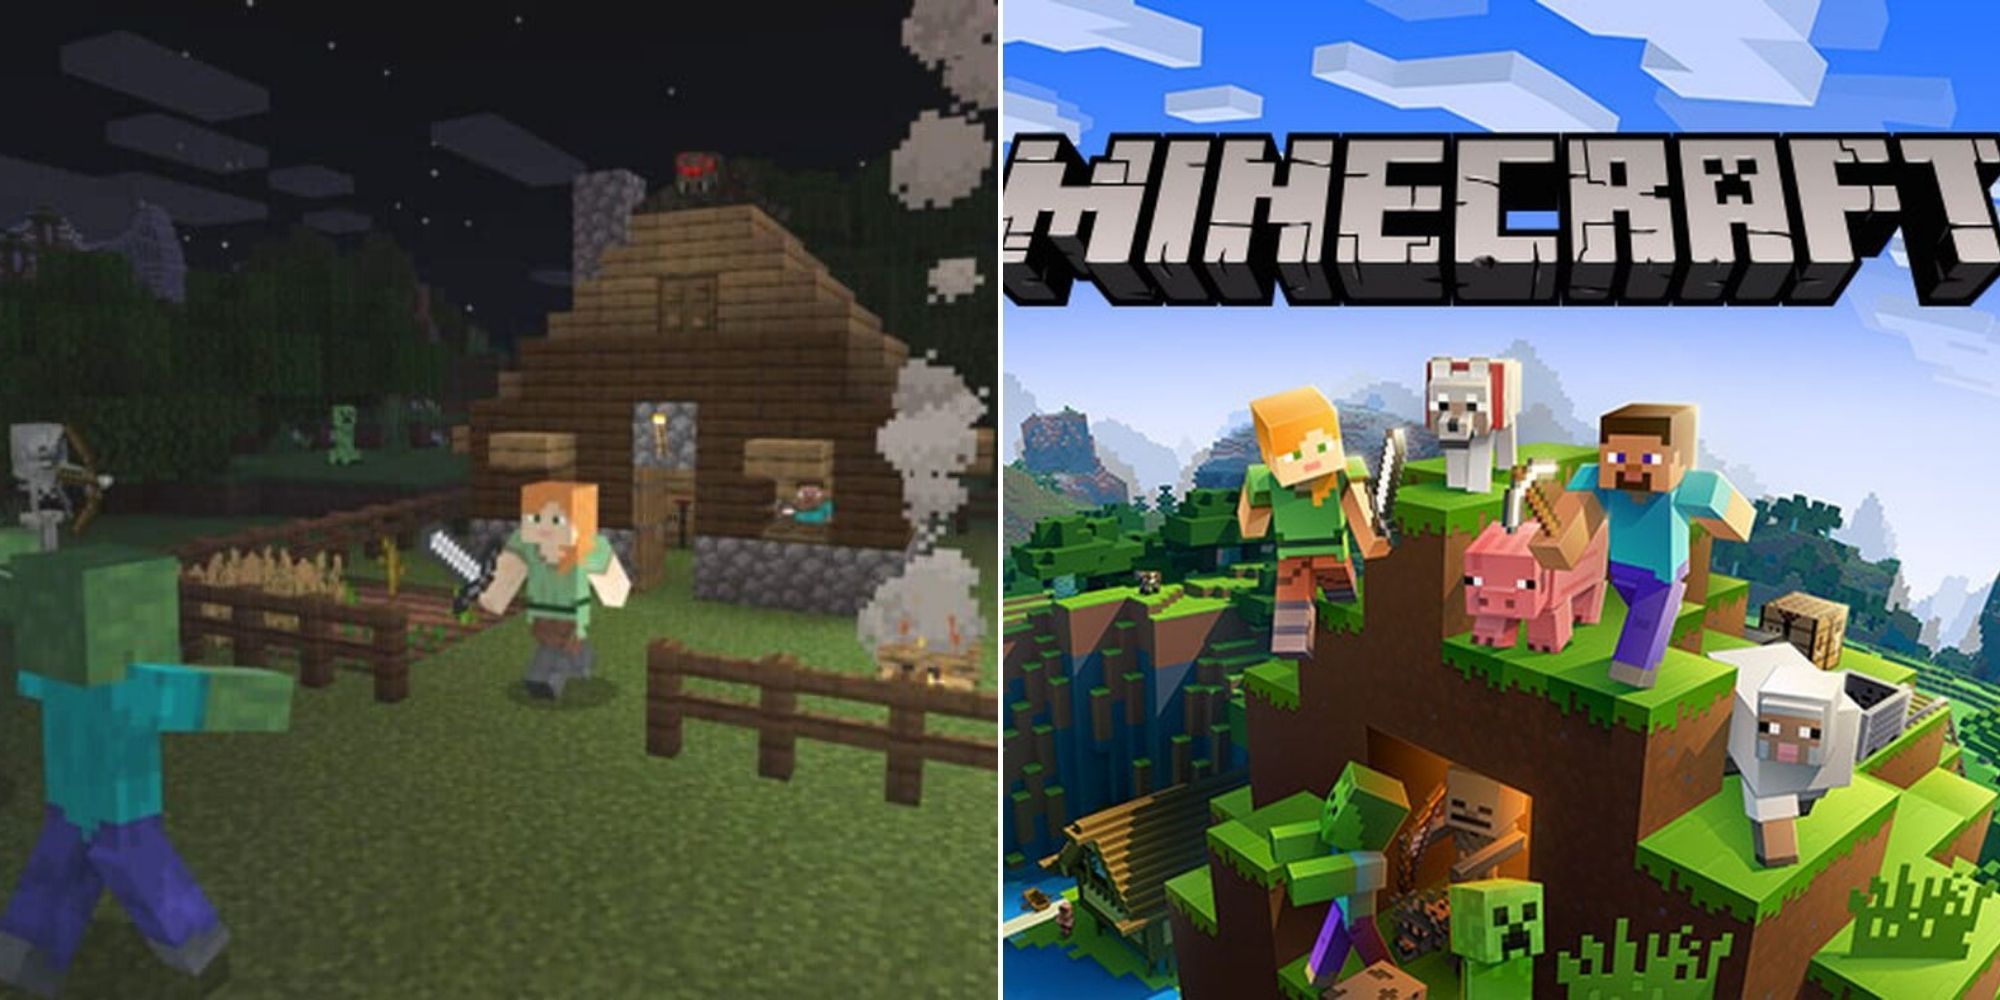 Minecraft - A player defending their house from Zombies - Cover art